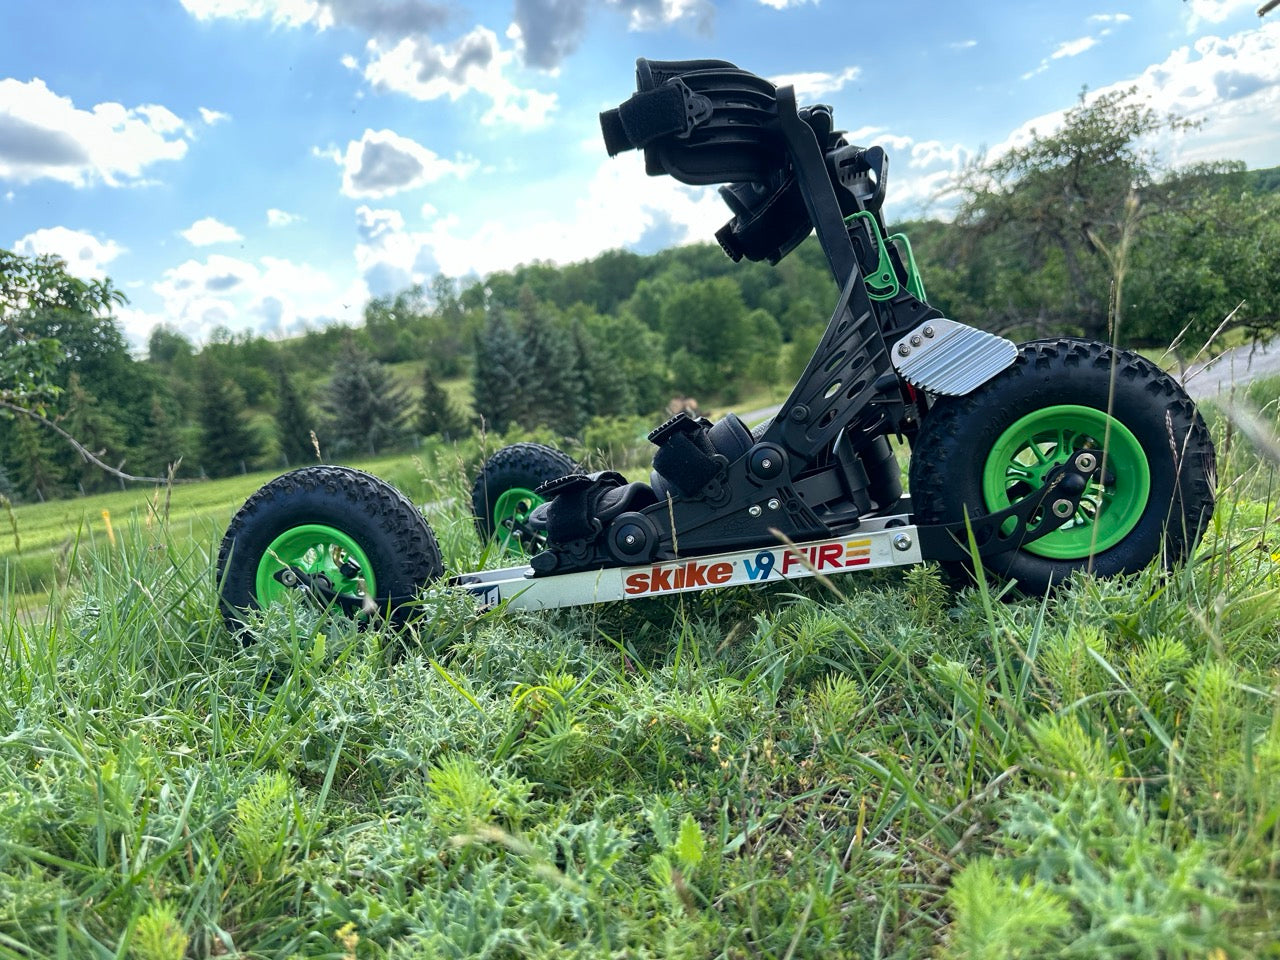 skike v9 FIRE 200 in the grass overlooking a green landscape